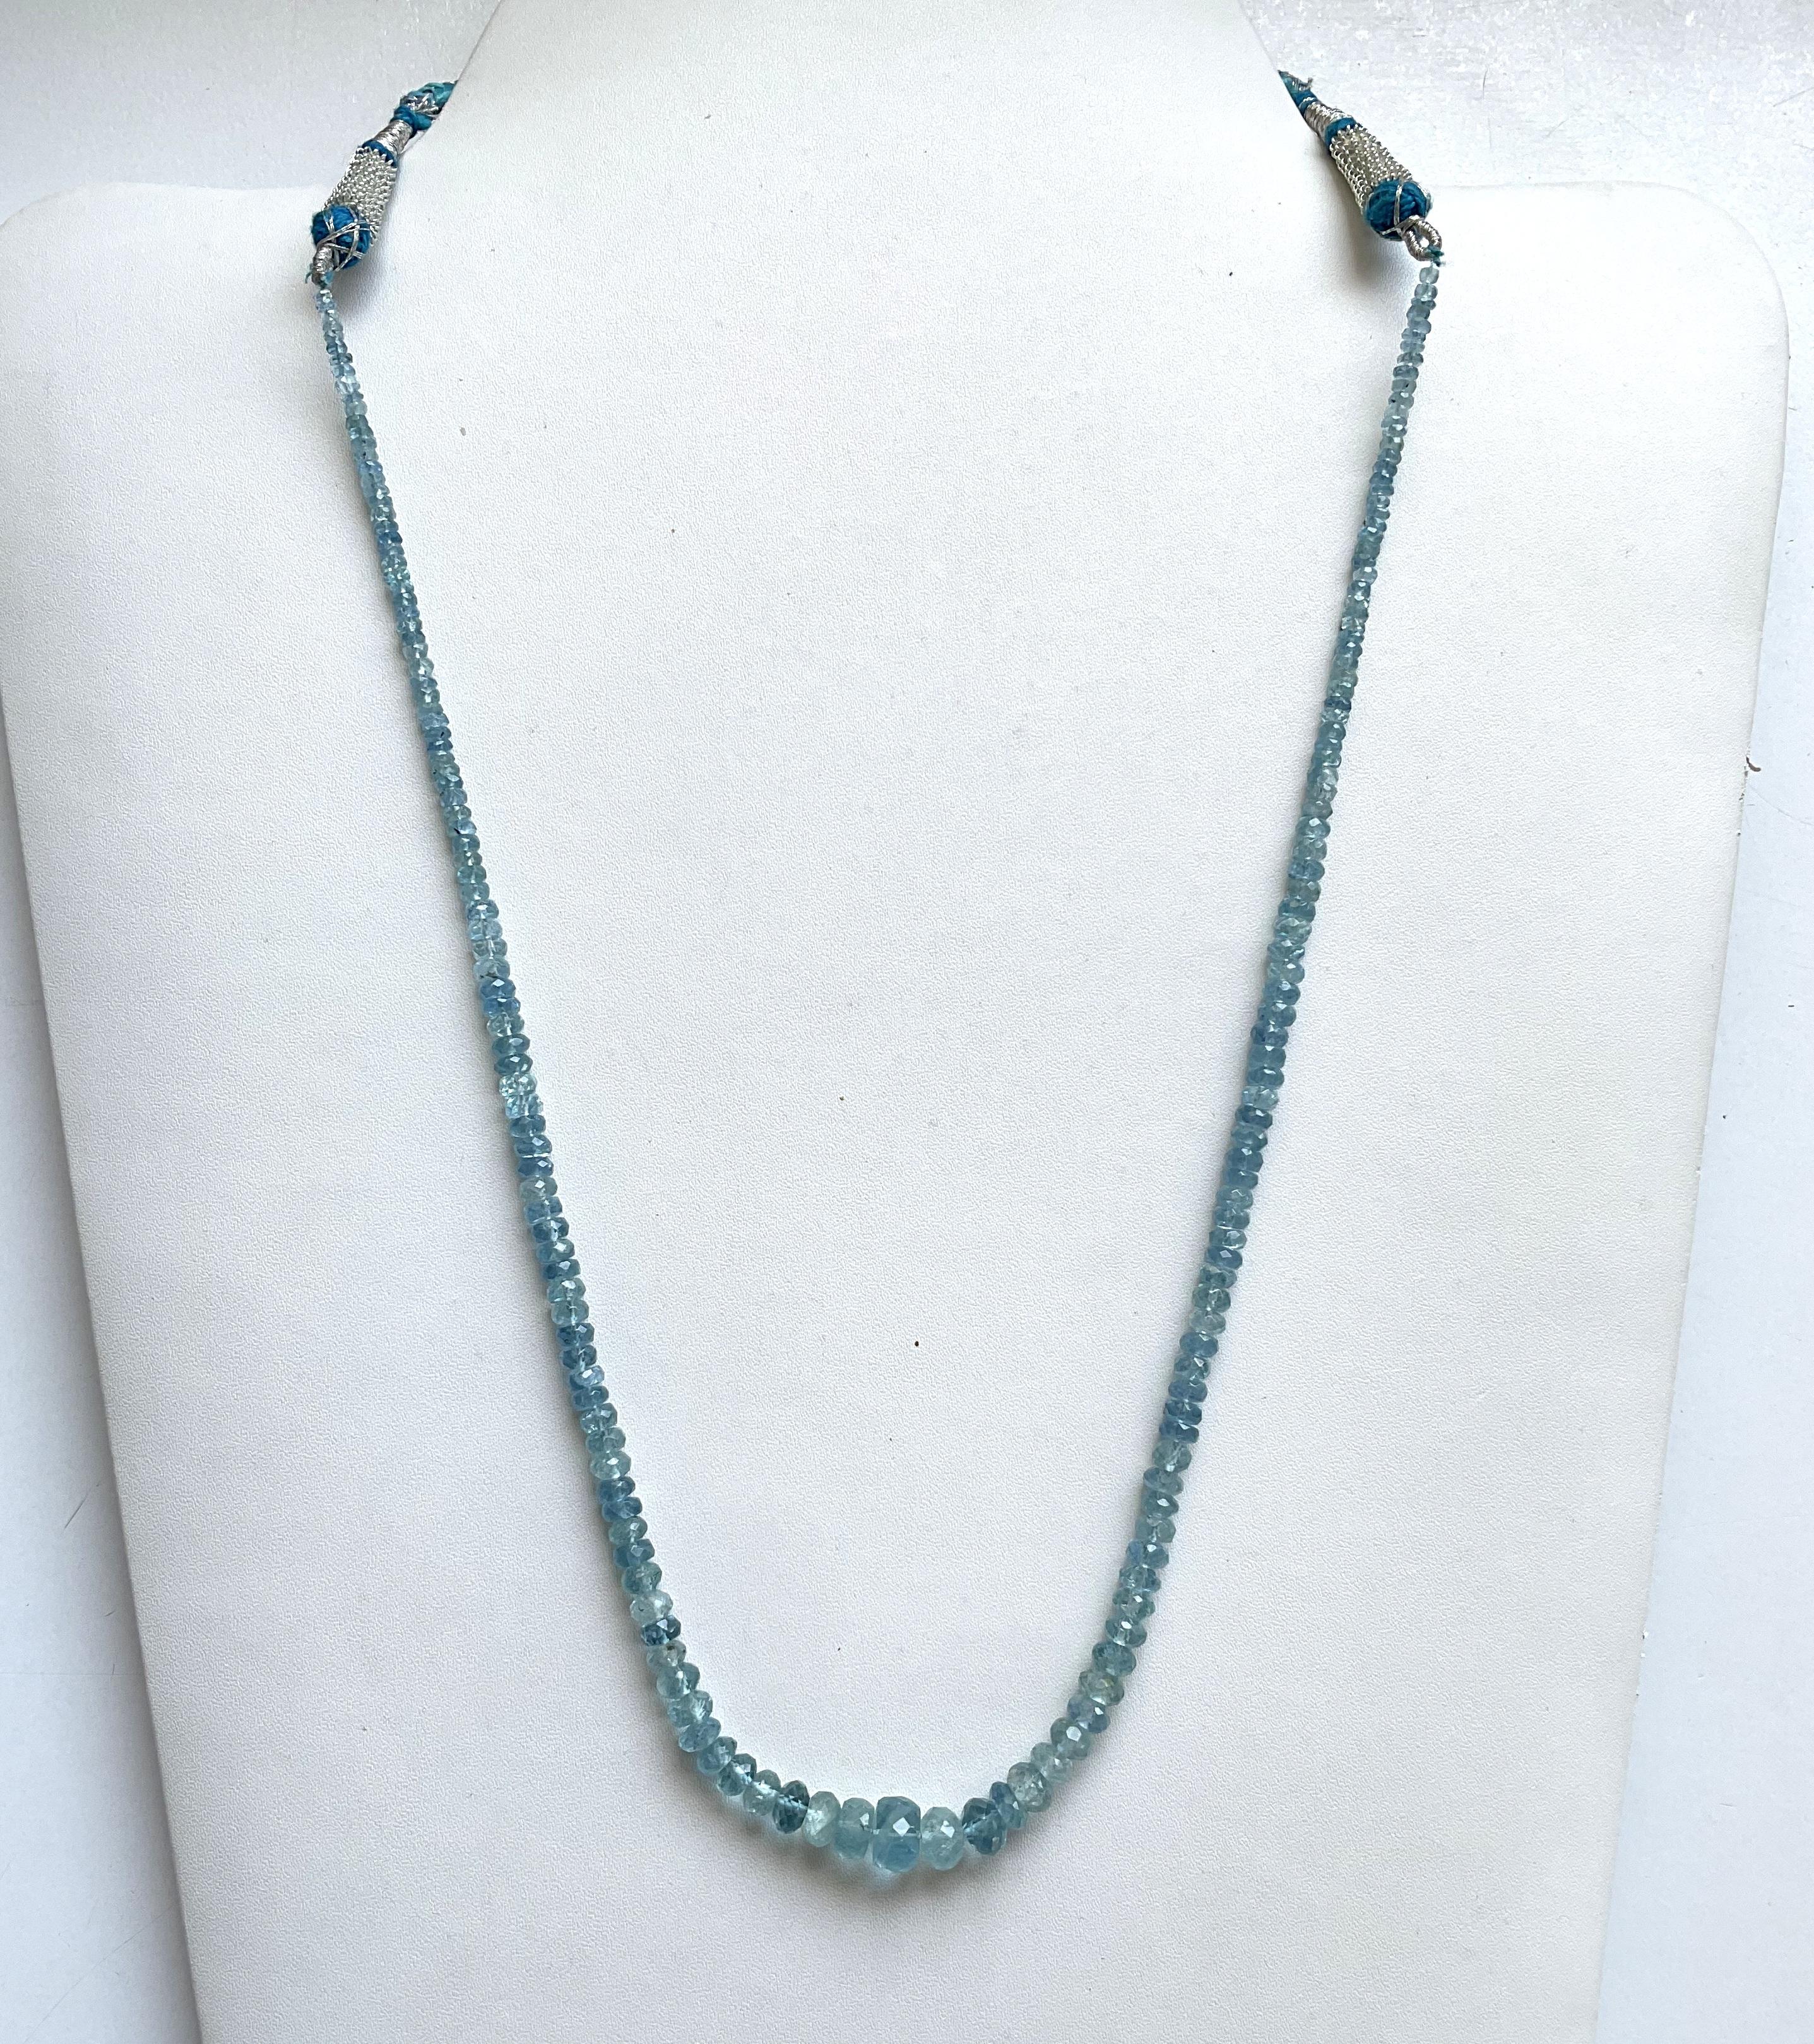 Women's or Men's 79.85 carats Aquamarine Beaded Necklace 1 Strand Faceted Beads good Quality Gem For Sale